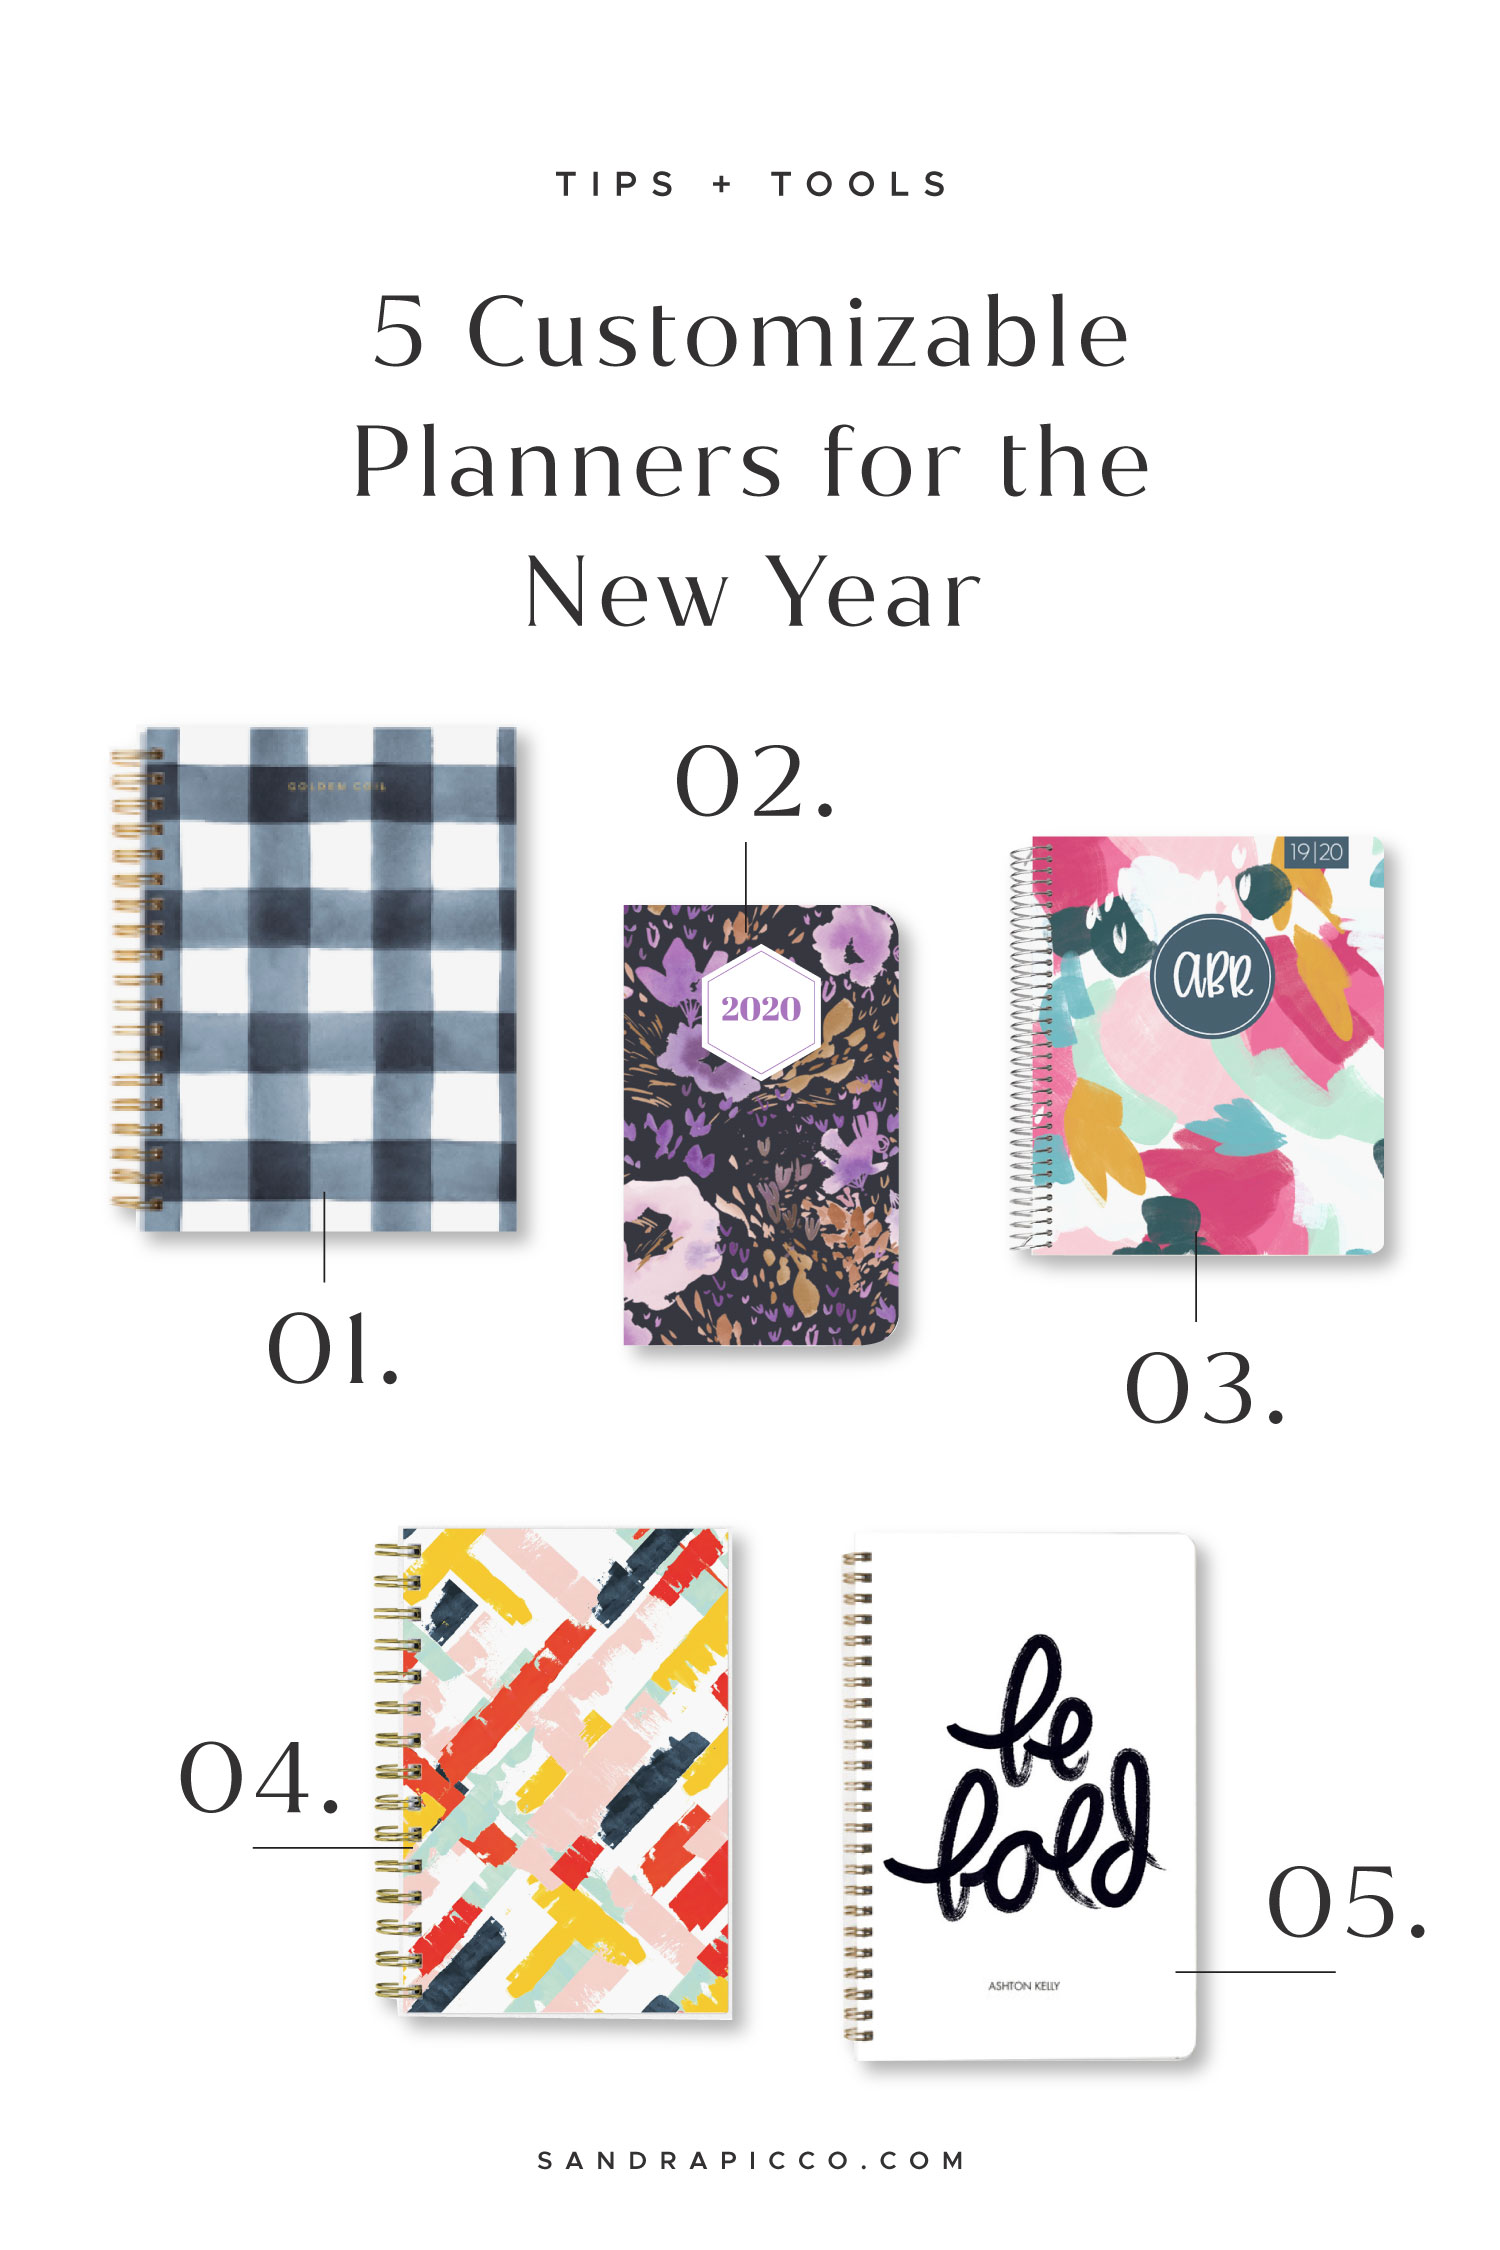 Five Customizable Planners for the New Year